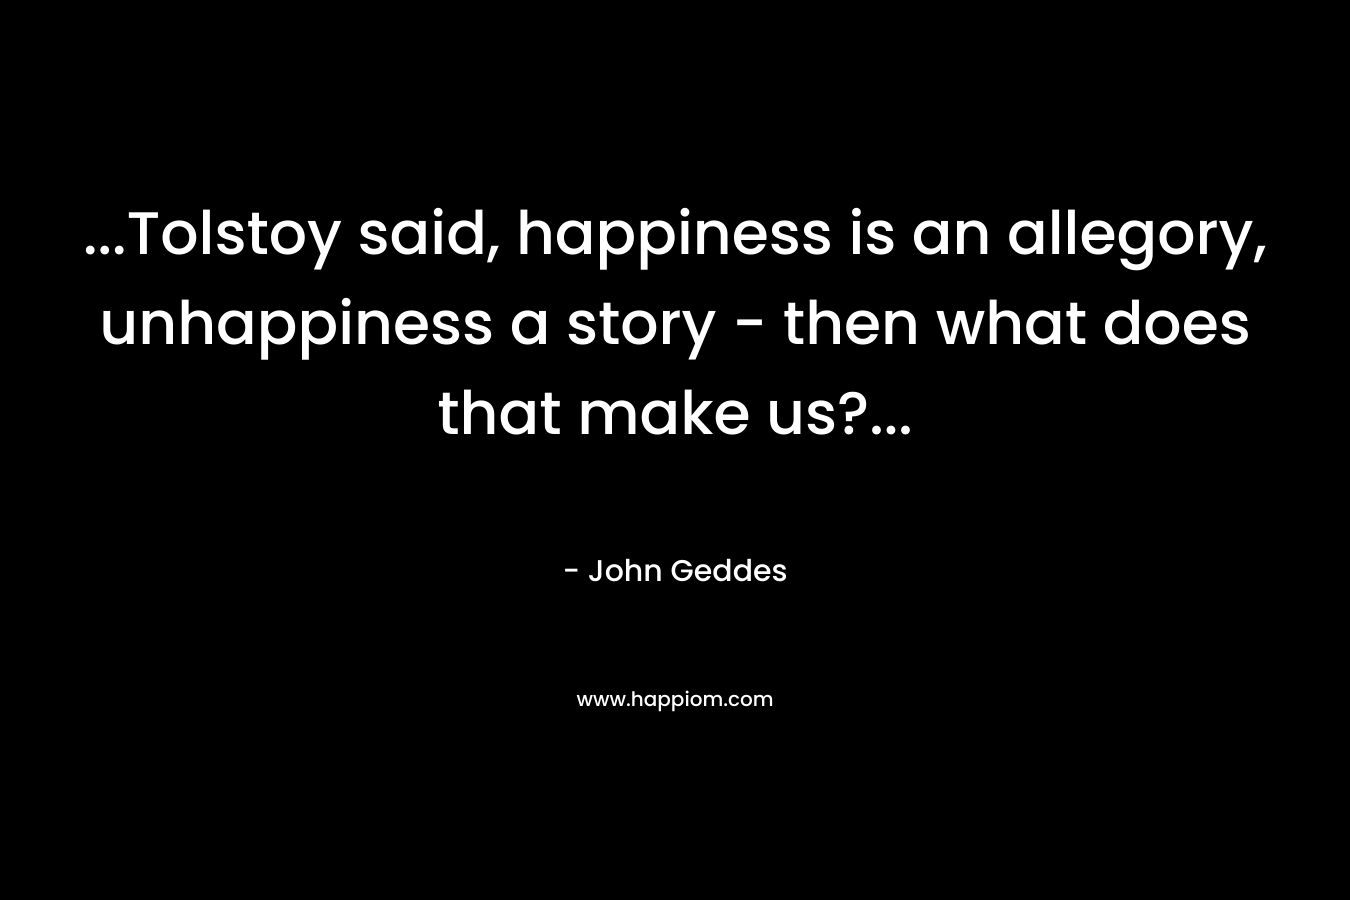 ...Tolstoy said, happiness is an allegory, unhappiness a story - then what does that make us?...